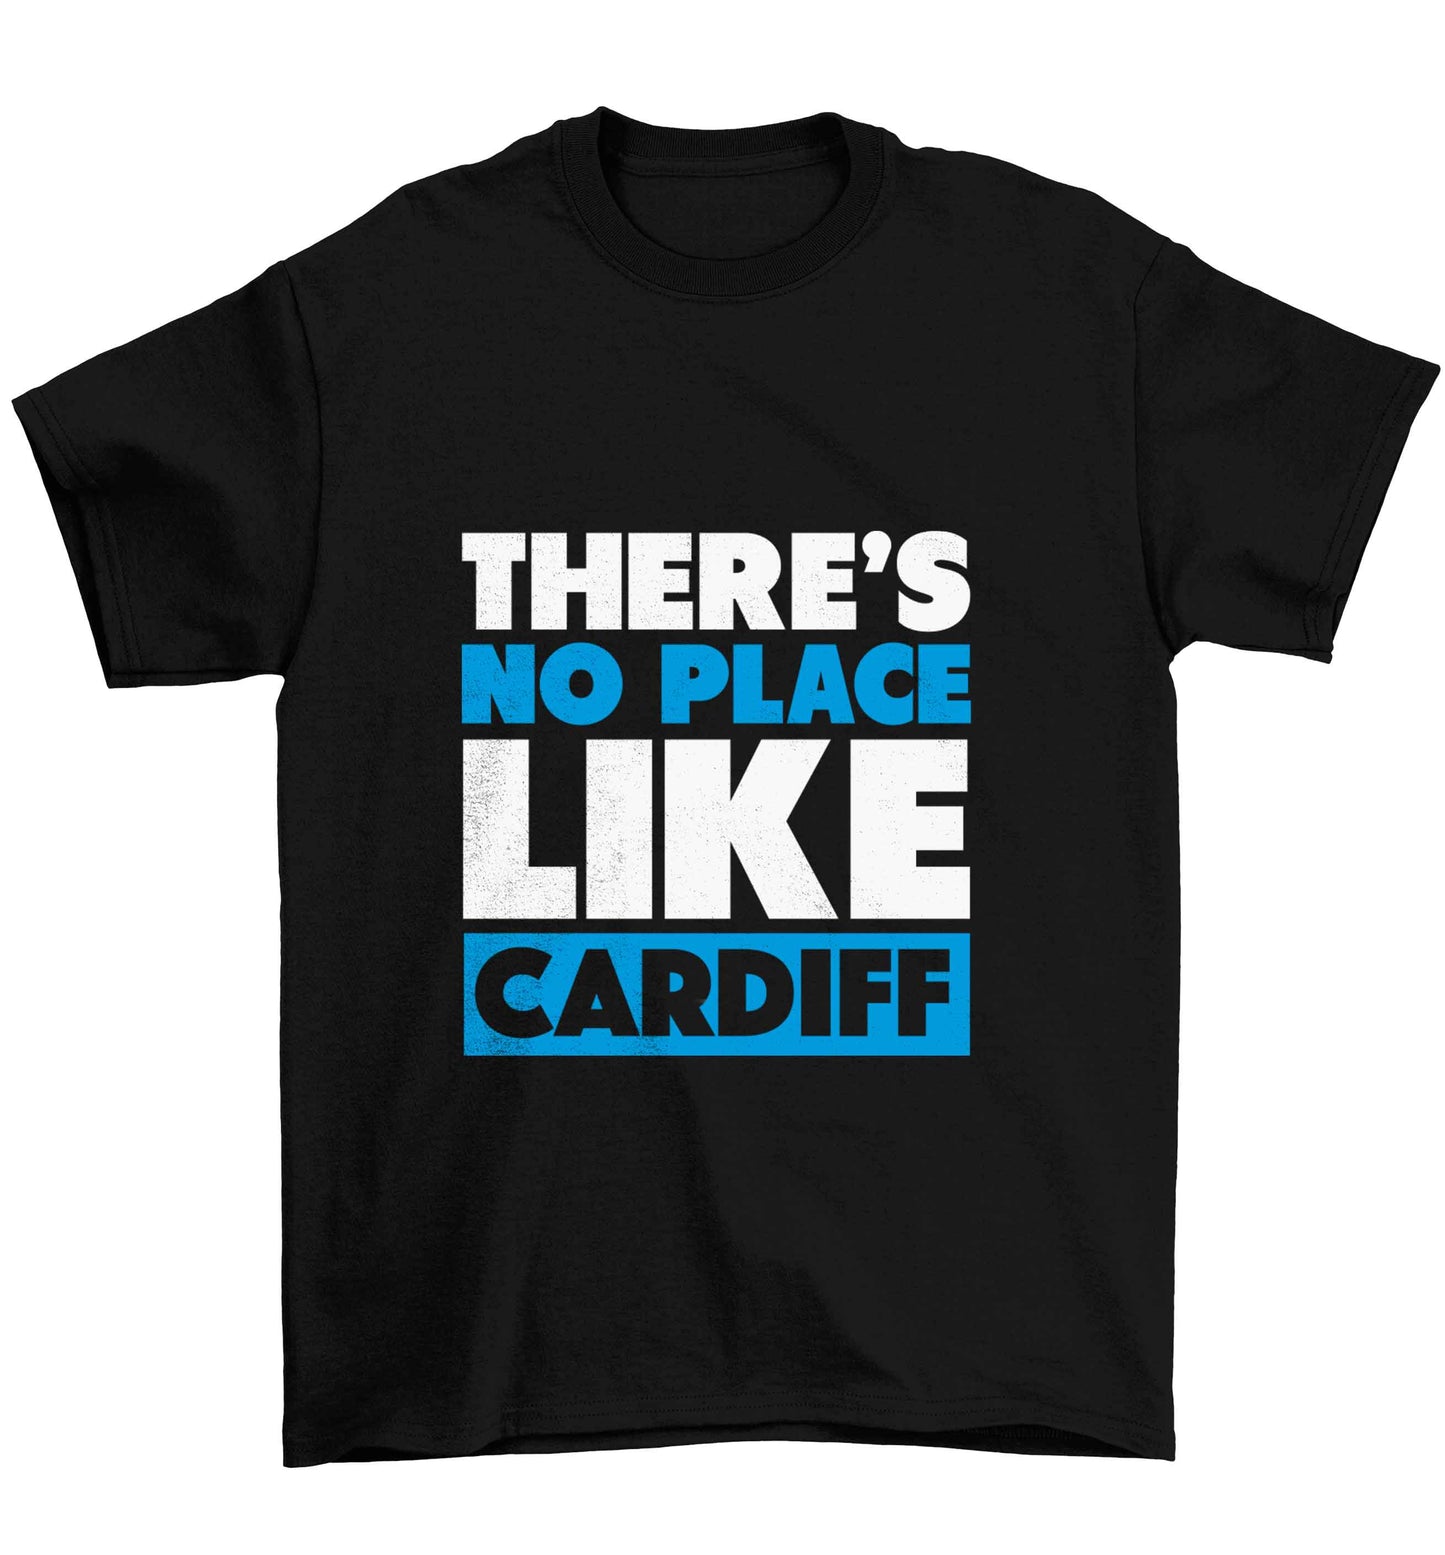 There's no place like Cardiff Children's black Tshirt 12-13 Years